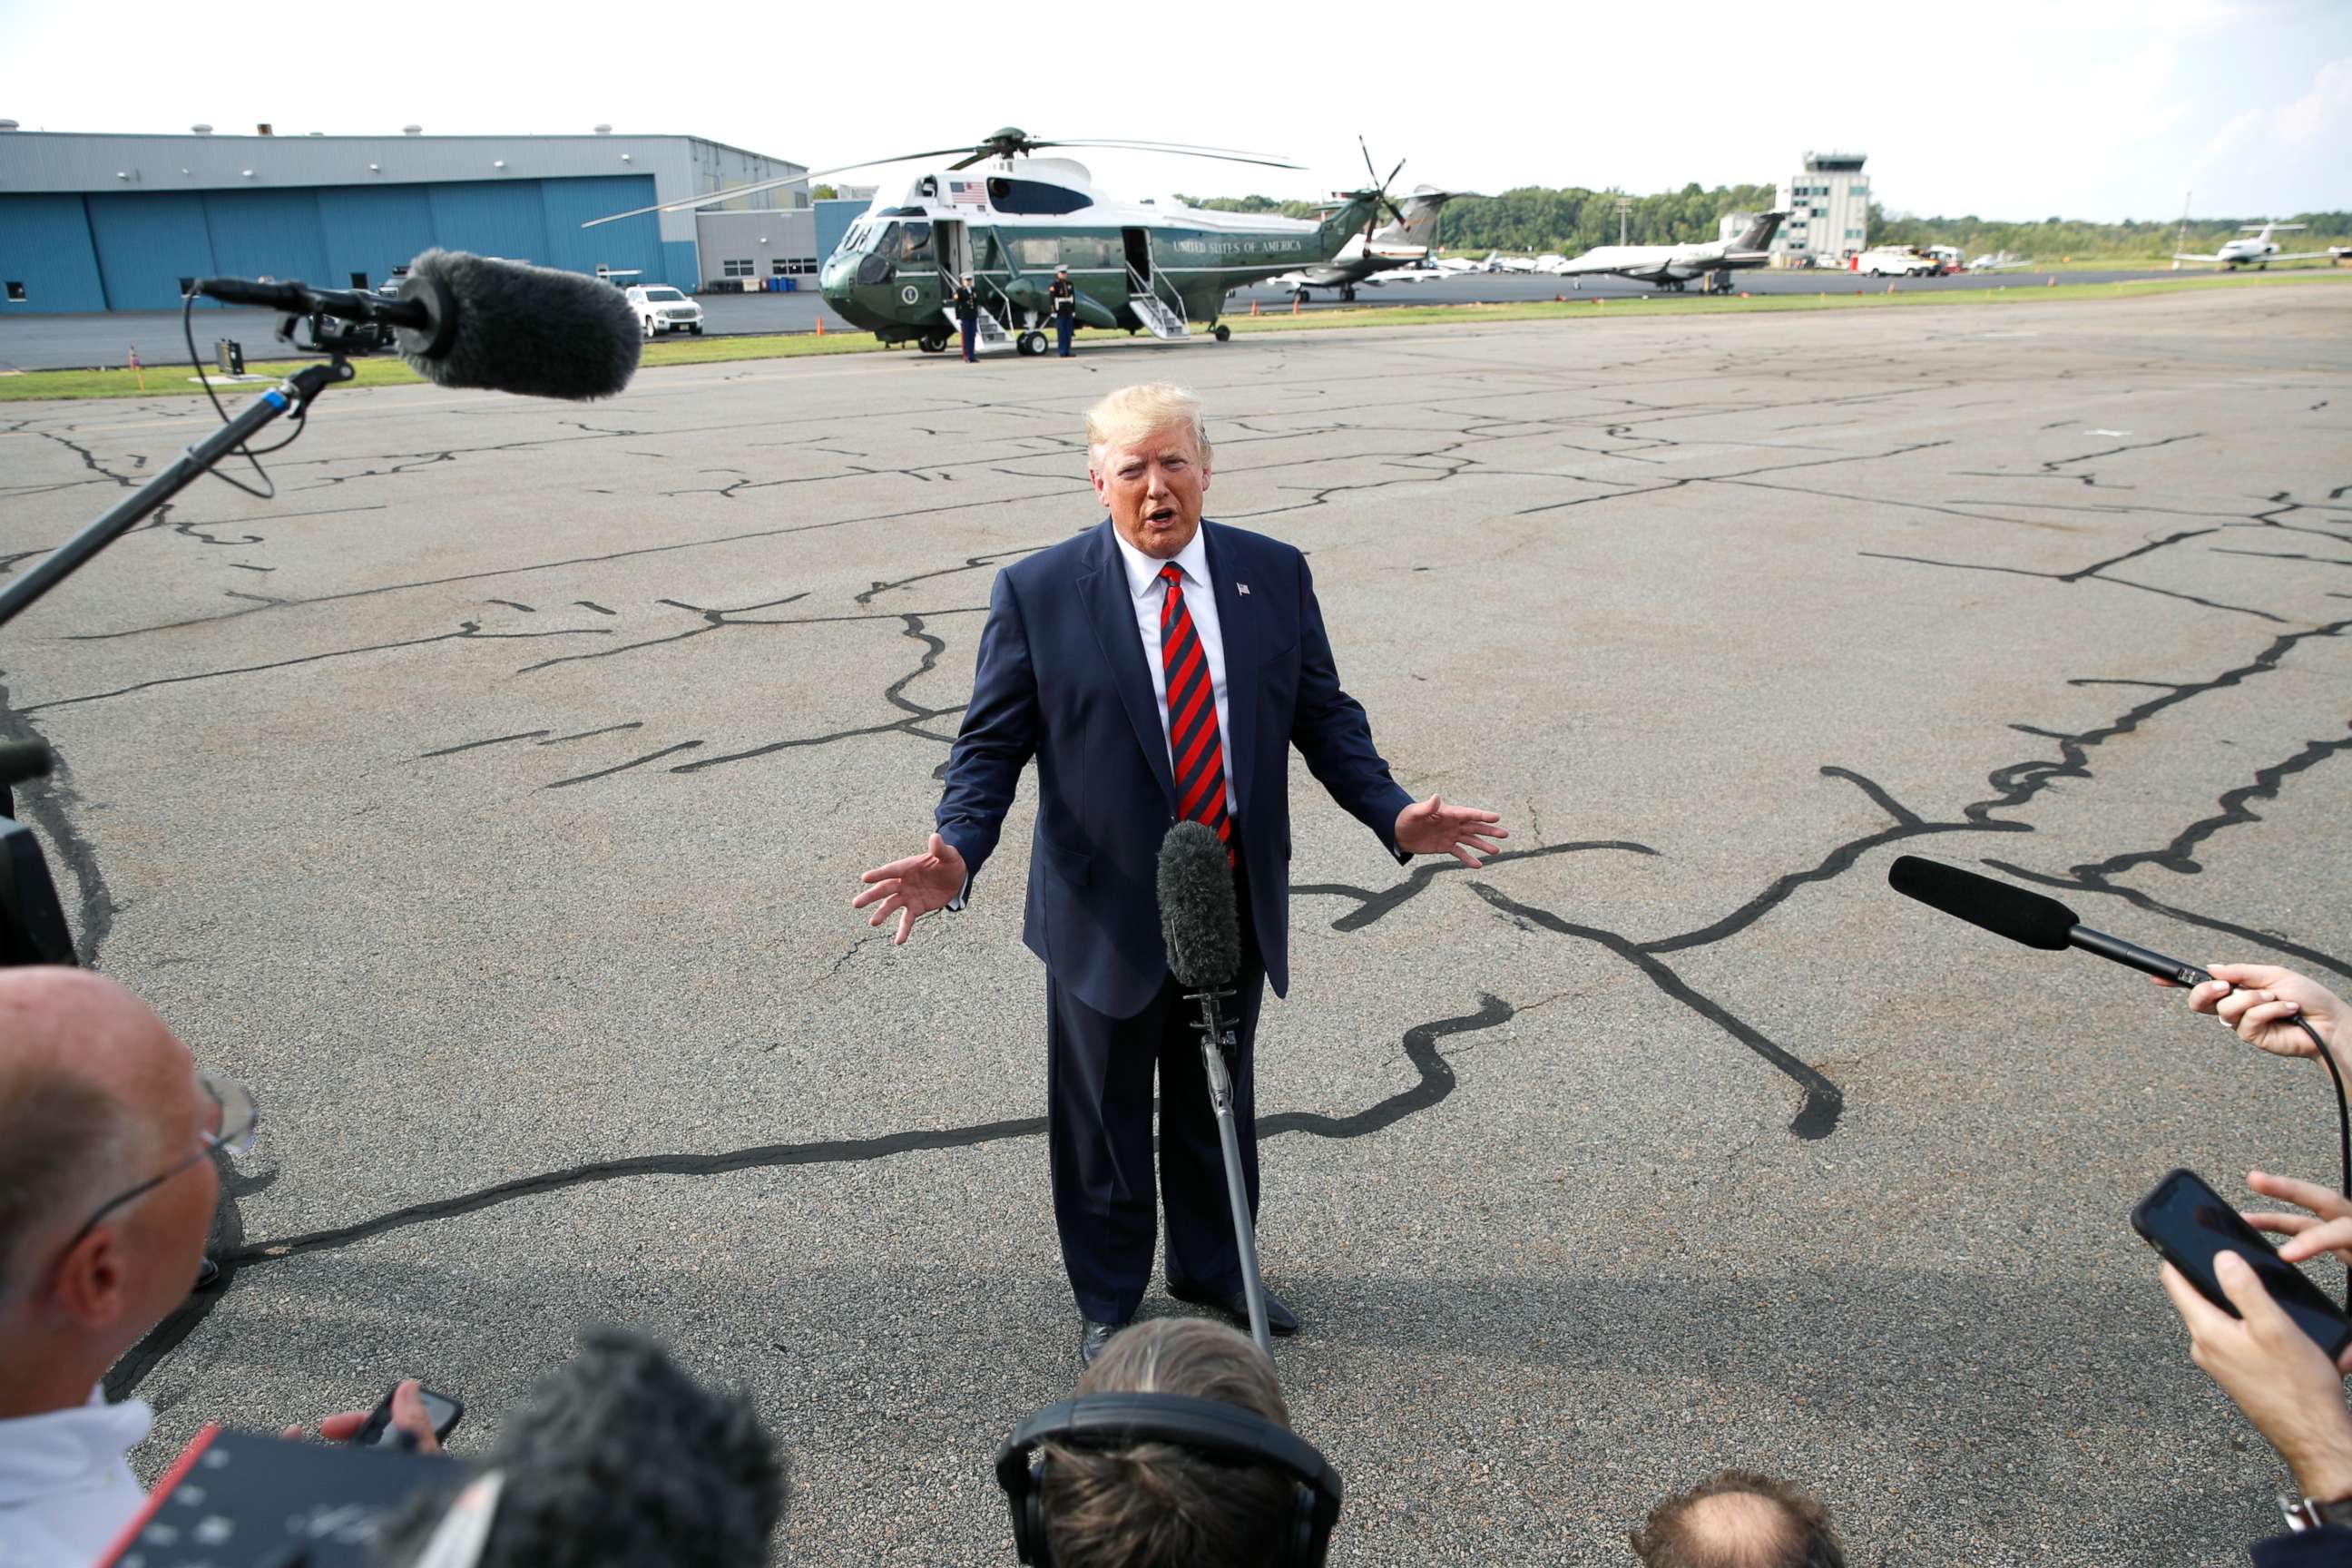 PHOTO:President Donald Trump speaks with reporters before boarding Air Force One at Morristown Municipal Airport in Morristown, N.J., Aug. 18, 2019.